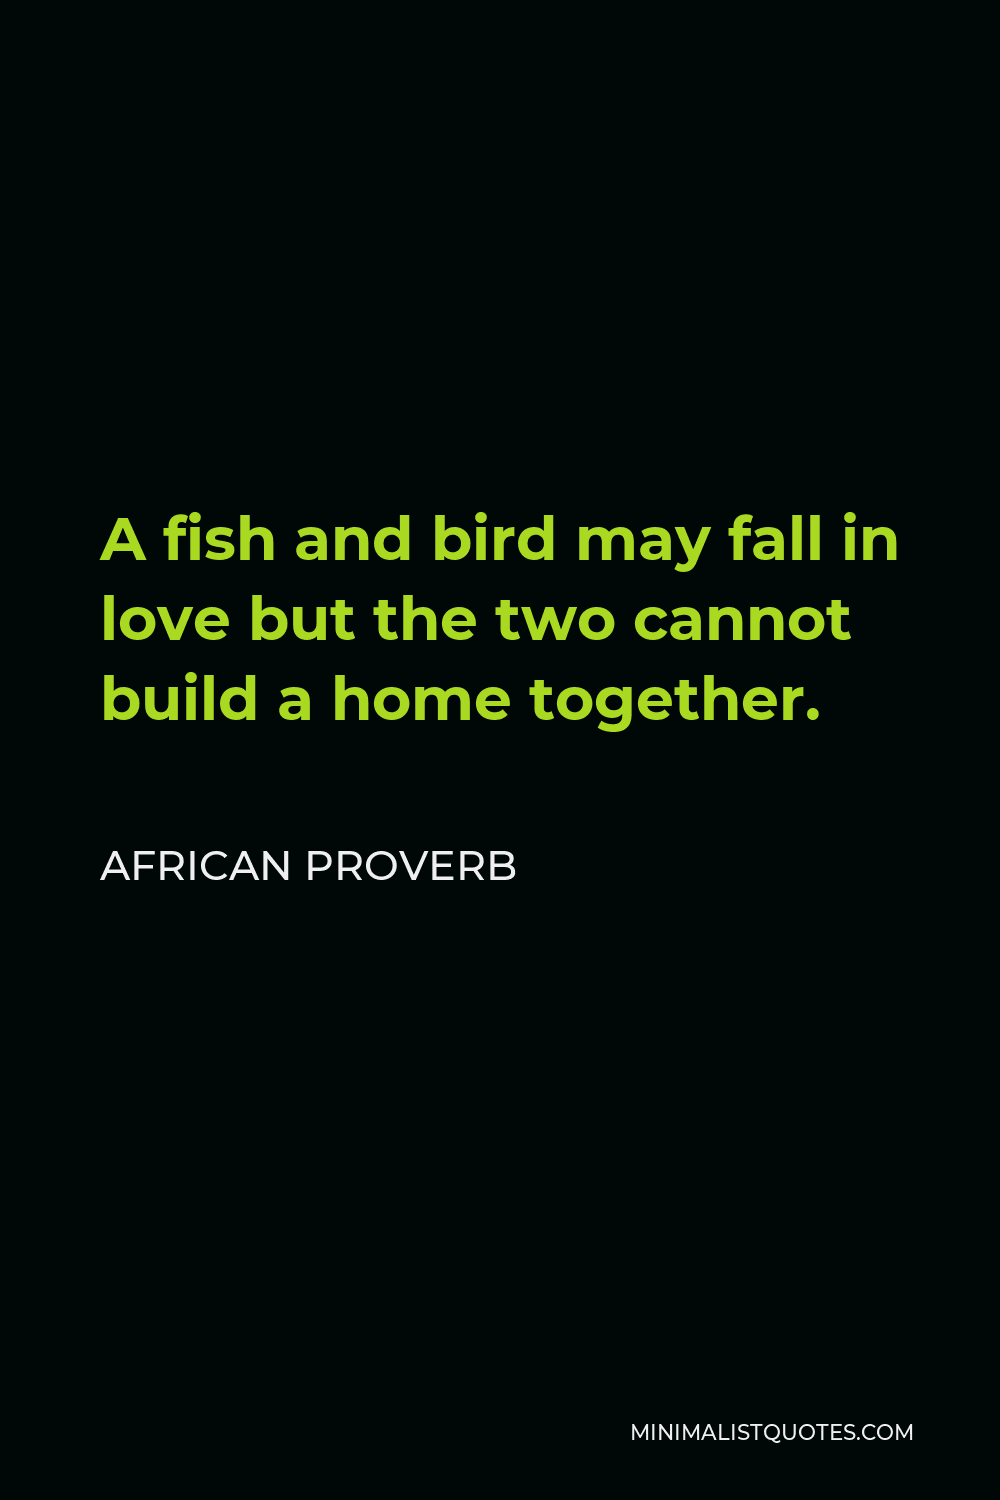 African Proverb Quote - A fish and bird may fall in love but the two cannot build a home together.